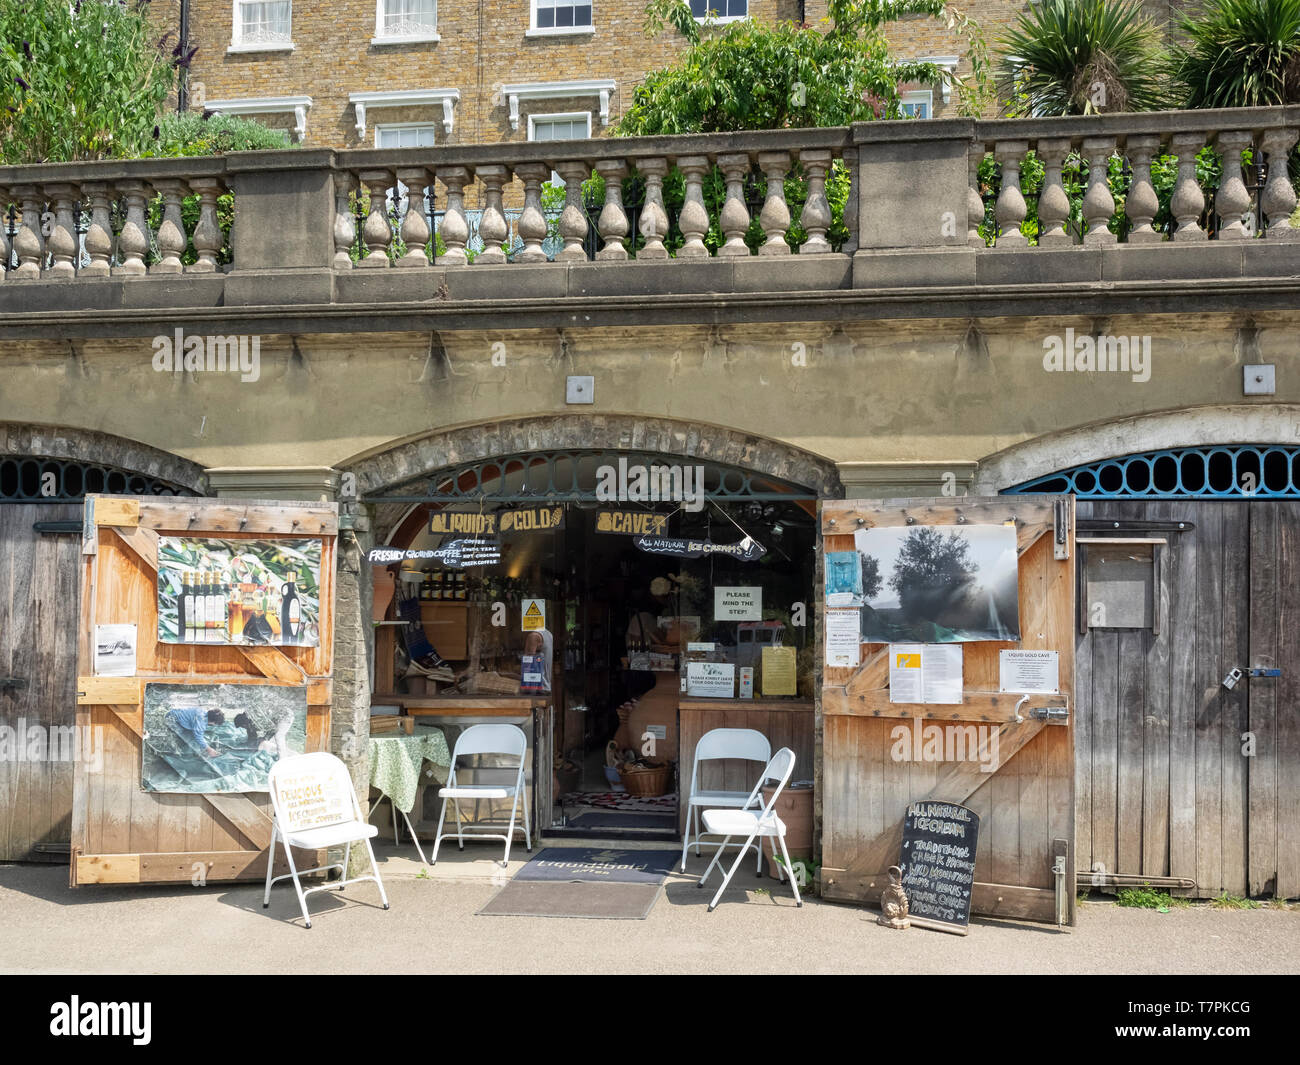 ICHMOND-UPON-THAMES, LONDON, UK -JULY 04, 2018:  Boathouse on Buccleuch Passage that has been converted to small Cafe Stock Photo